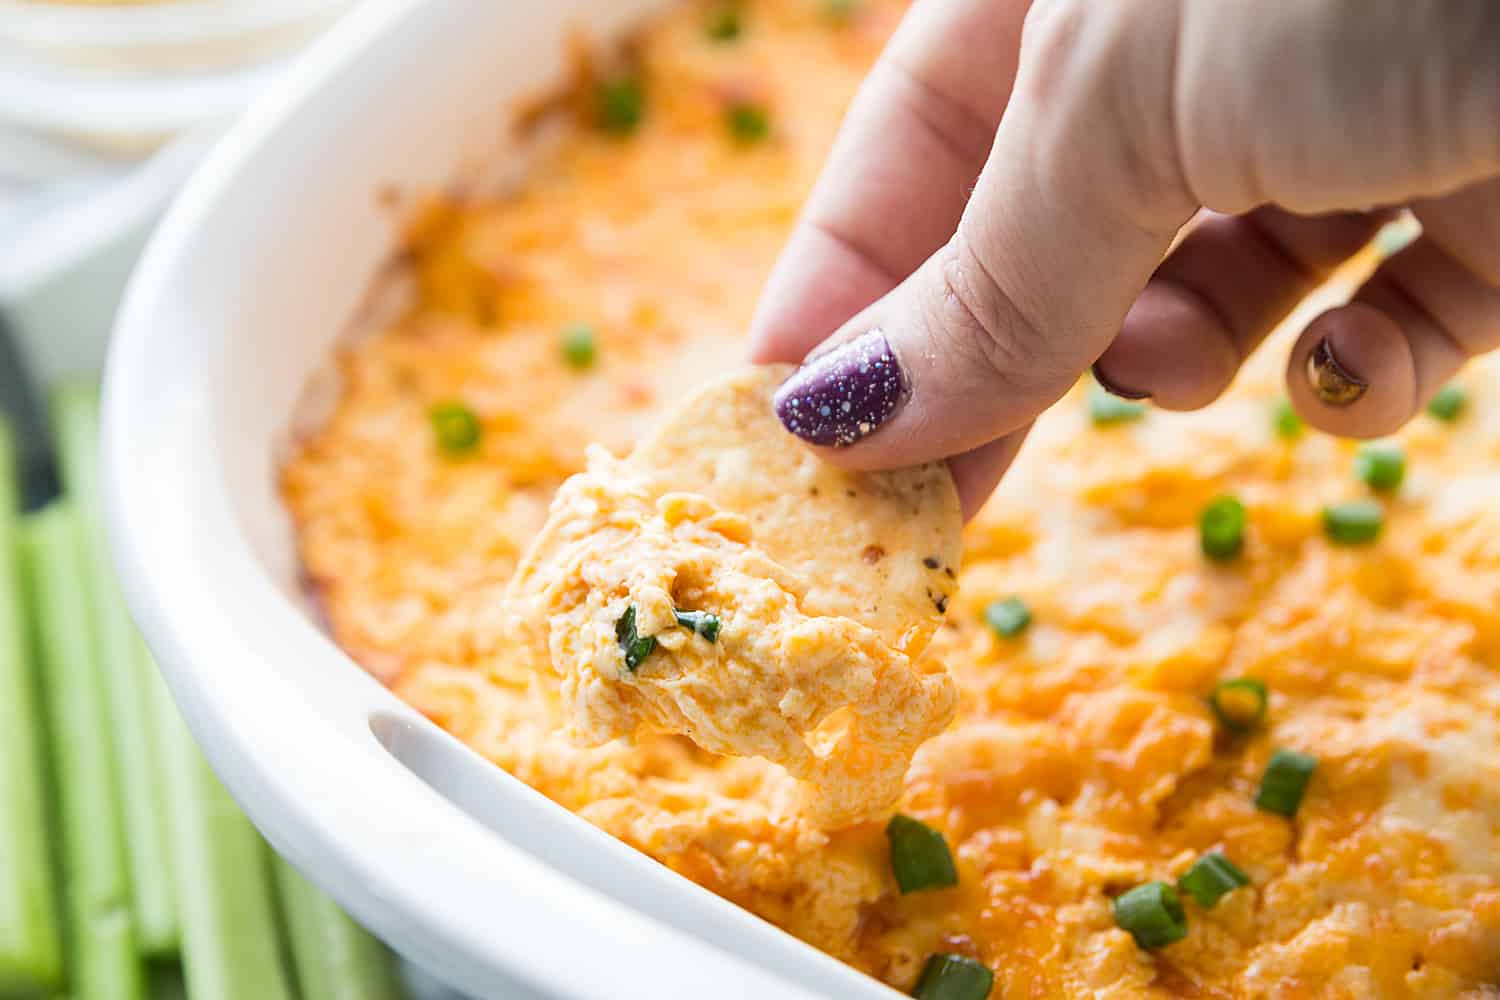 Dipping a chip in a Buffalo Chicken Dip.